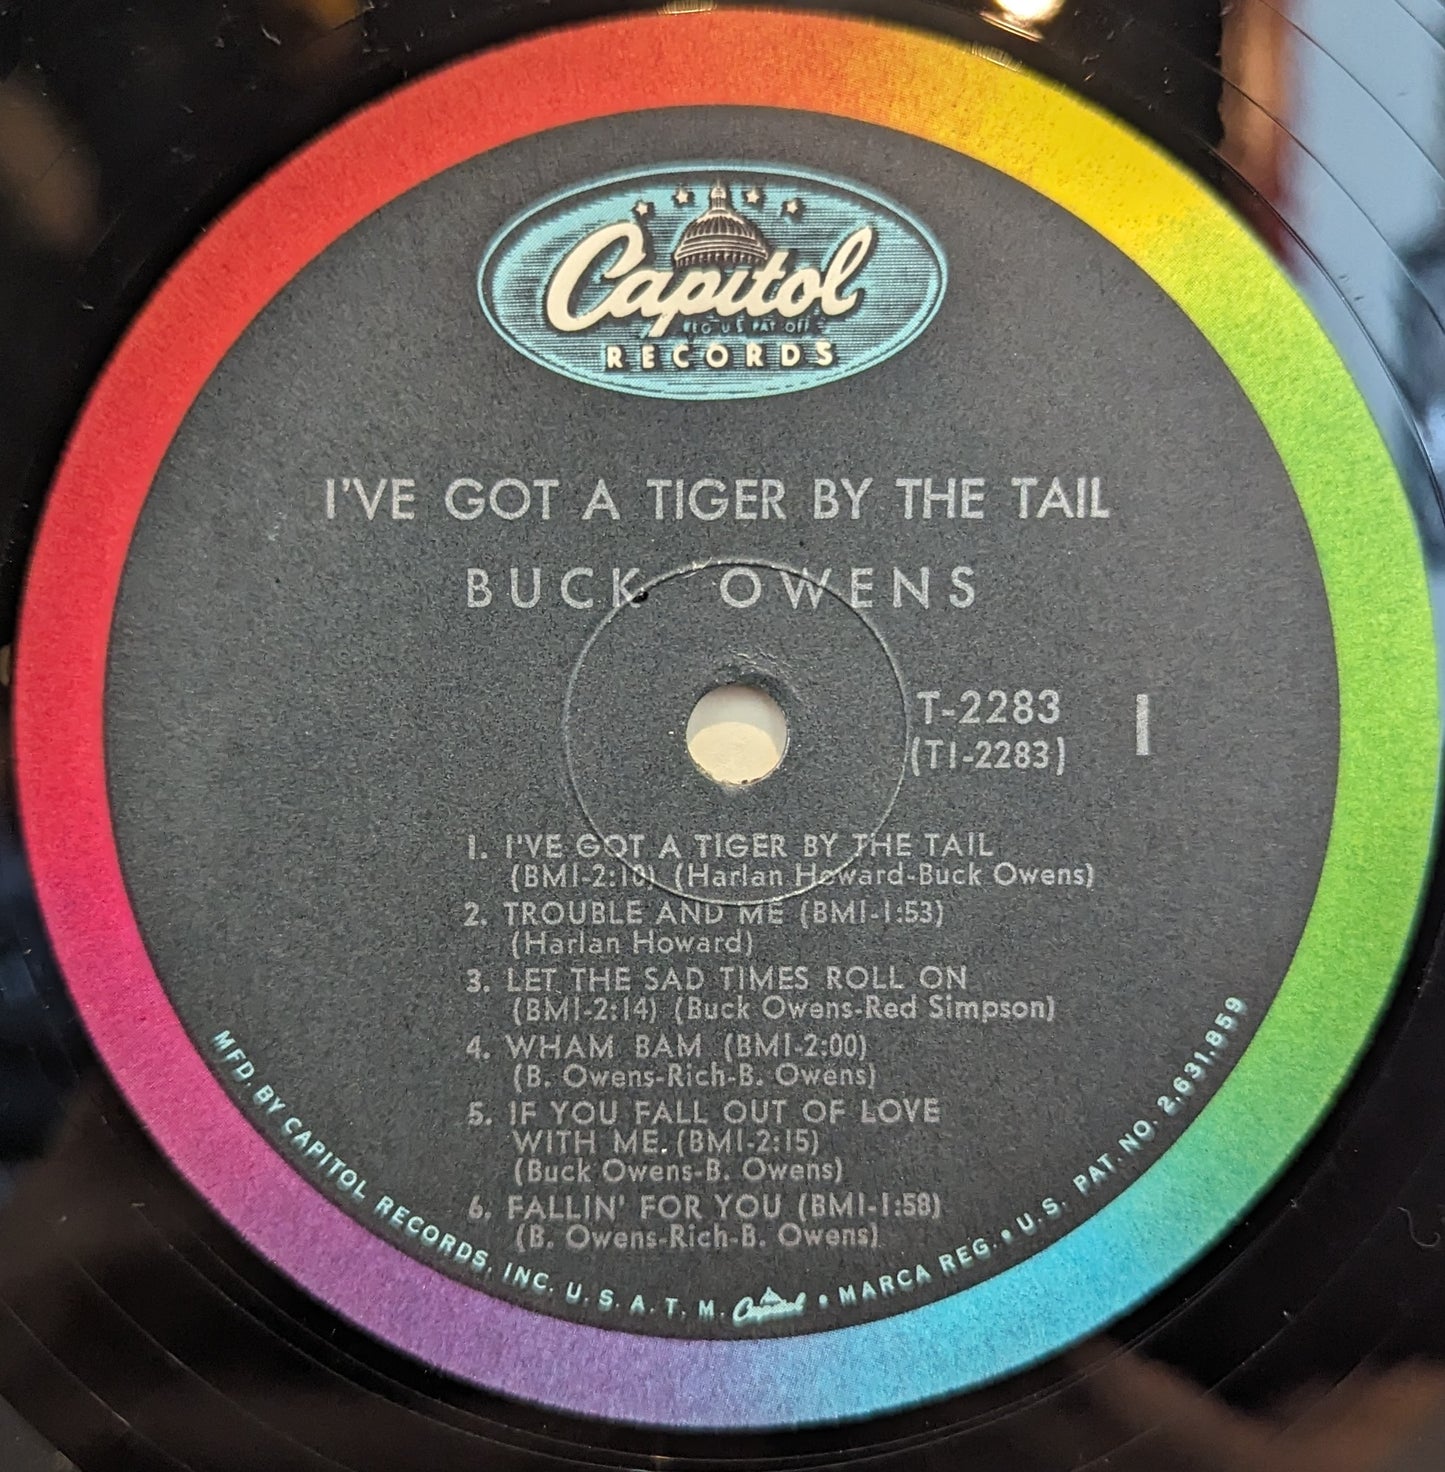 Buck Owens And His Buckaroos I've Got A Tiger By The Tail *MONO* LP Near Mint (NM or M-) Near Mint (NM or M-)